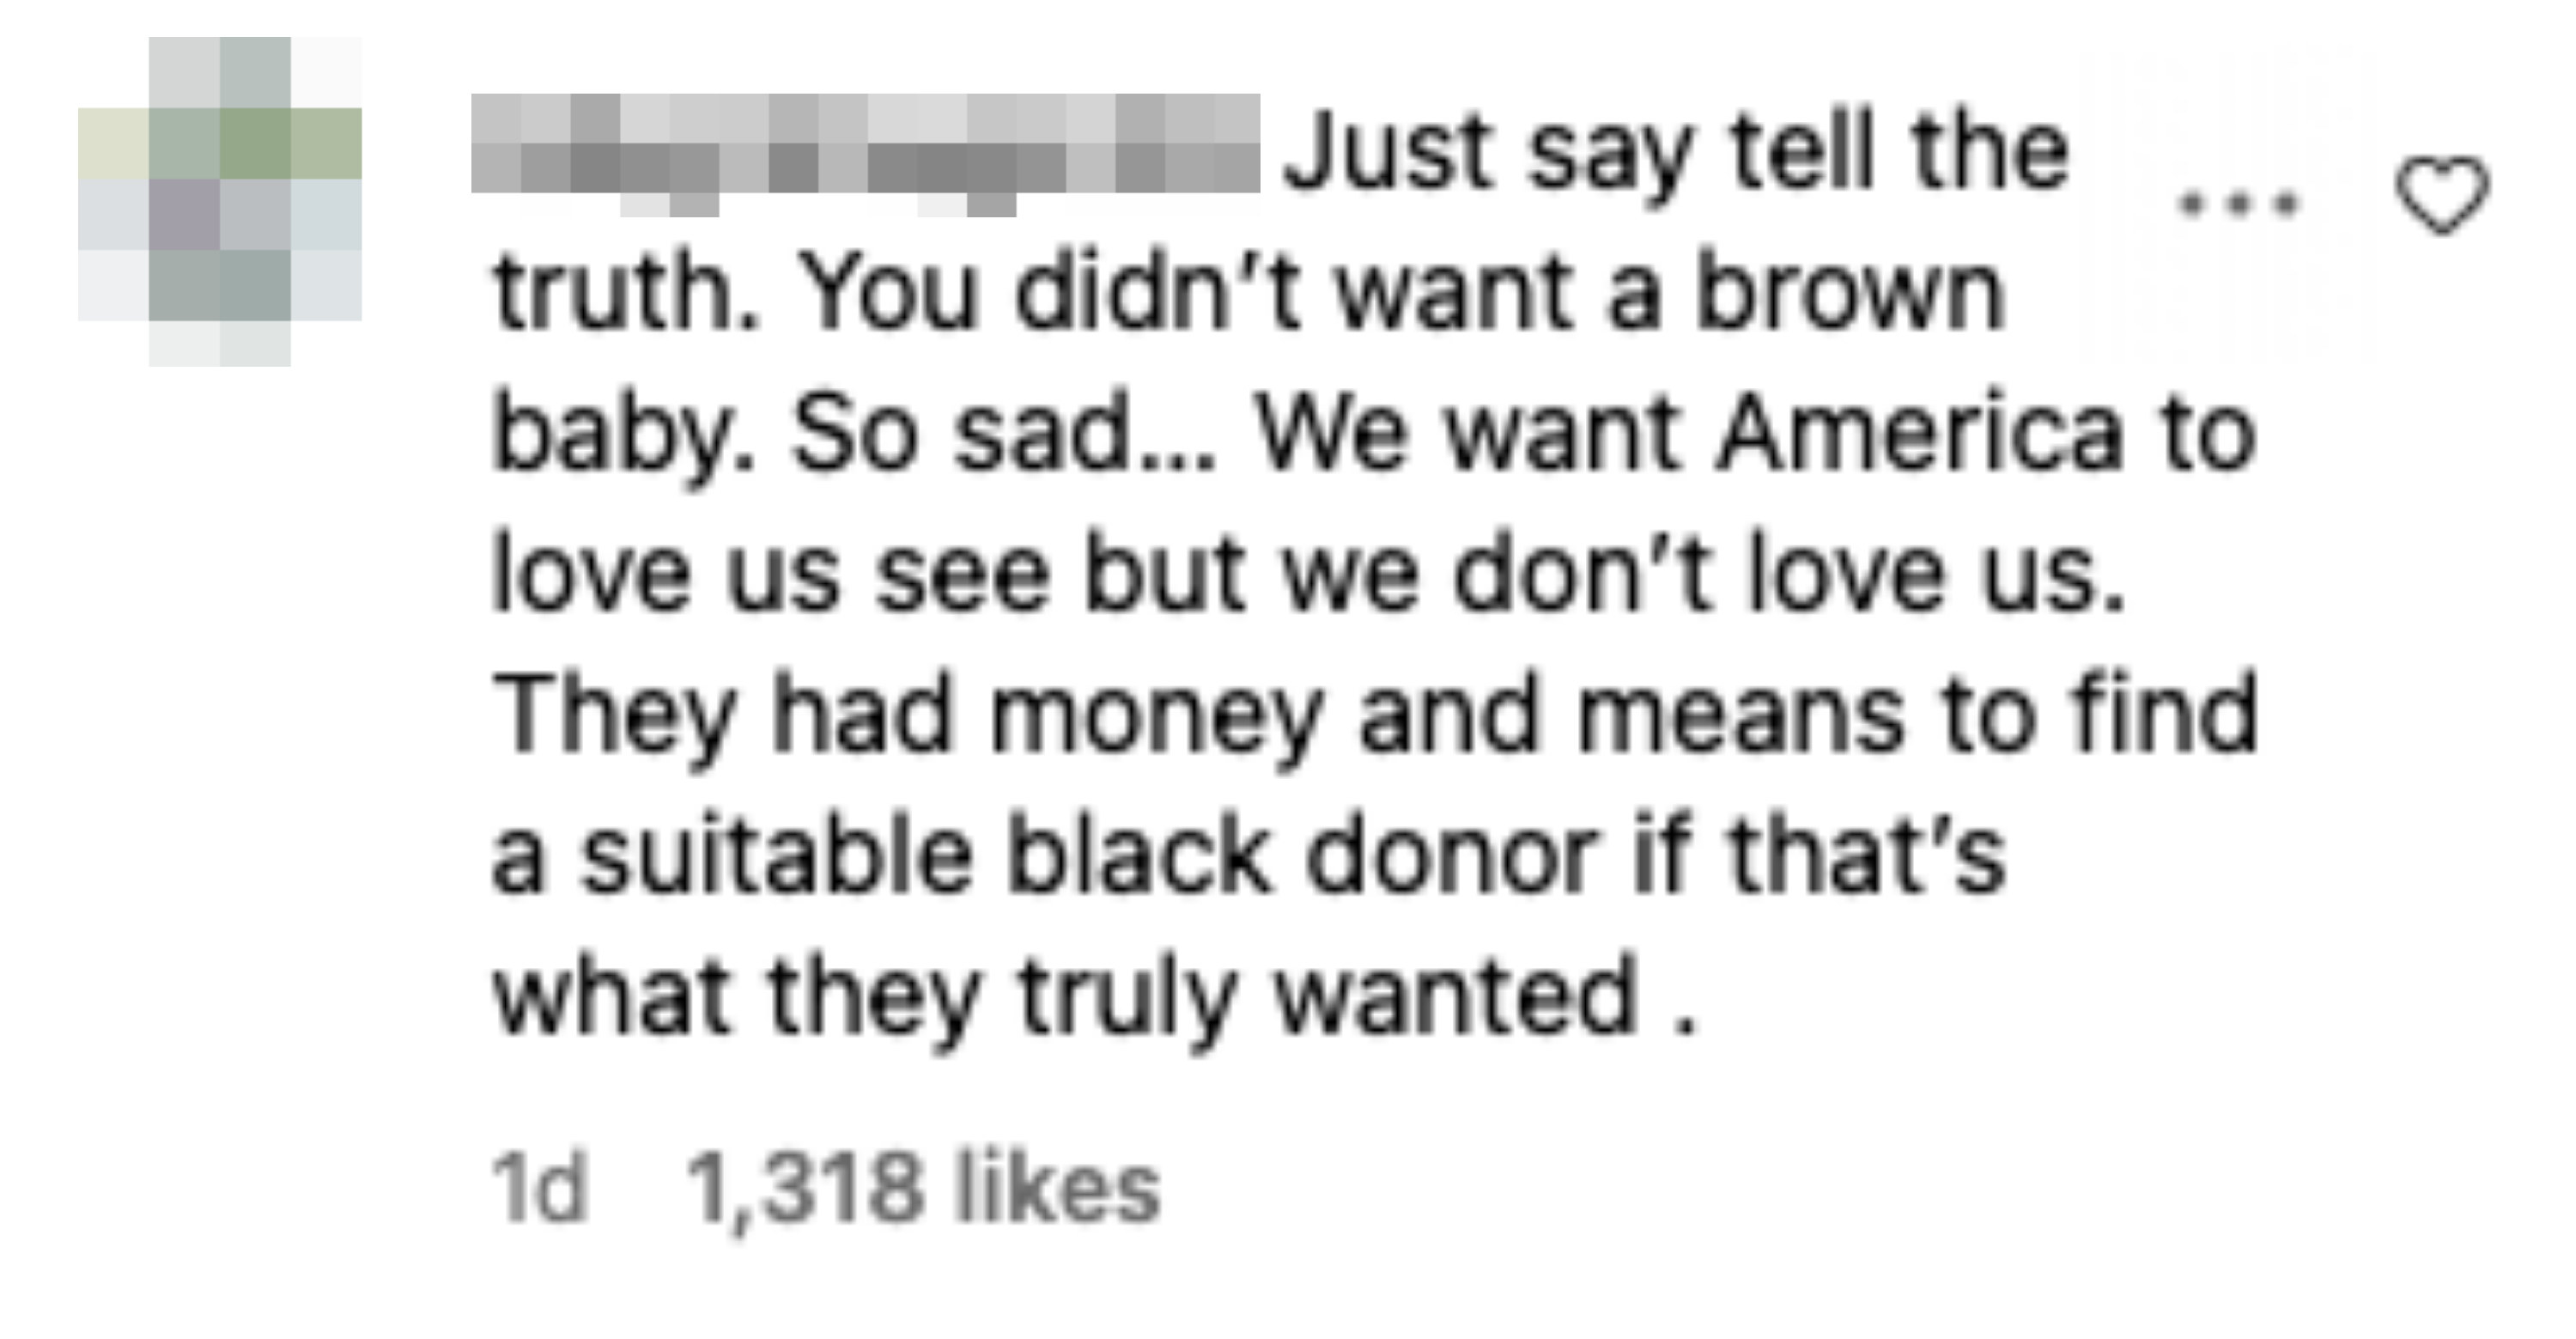 A comment saying &quot;the couple didn&#x27;t not wanting a brown baby. We want America to love us see but we don&#x27;t love us. They had money and means to find a suitable Black donor if that&#x27;s what they truly wanted&quot;